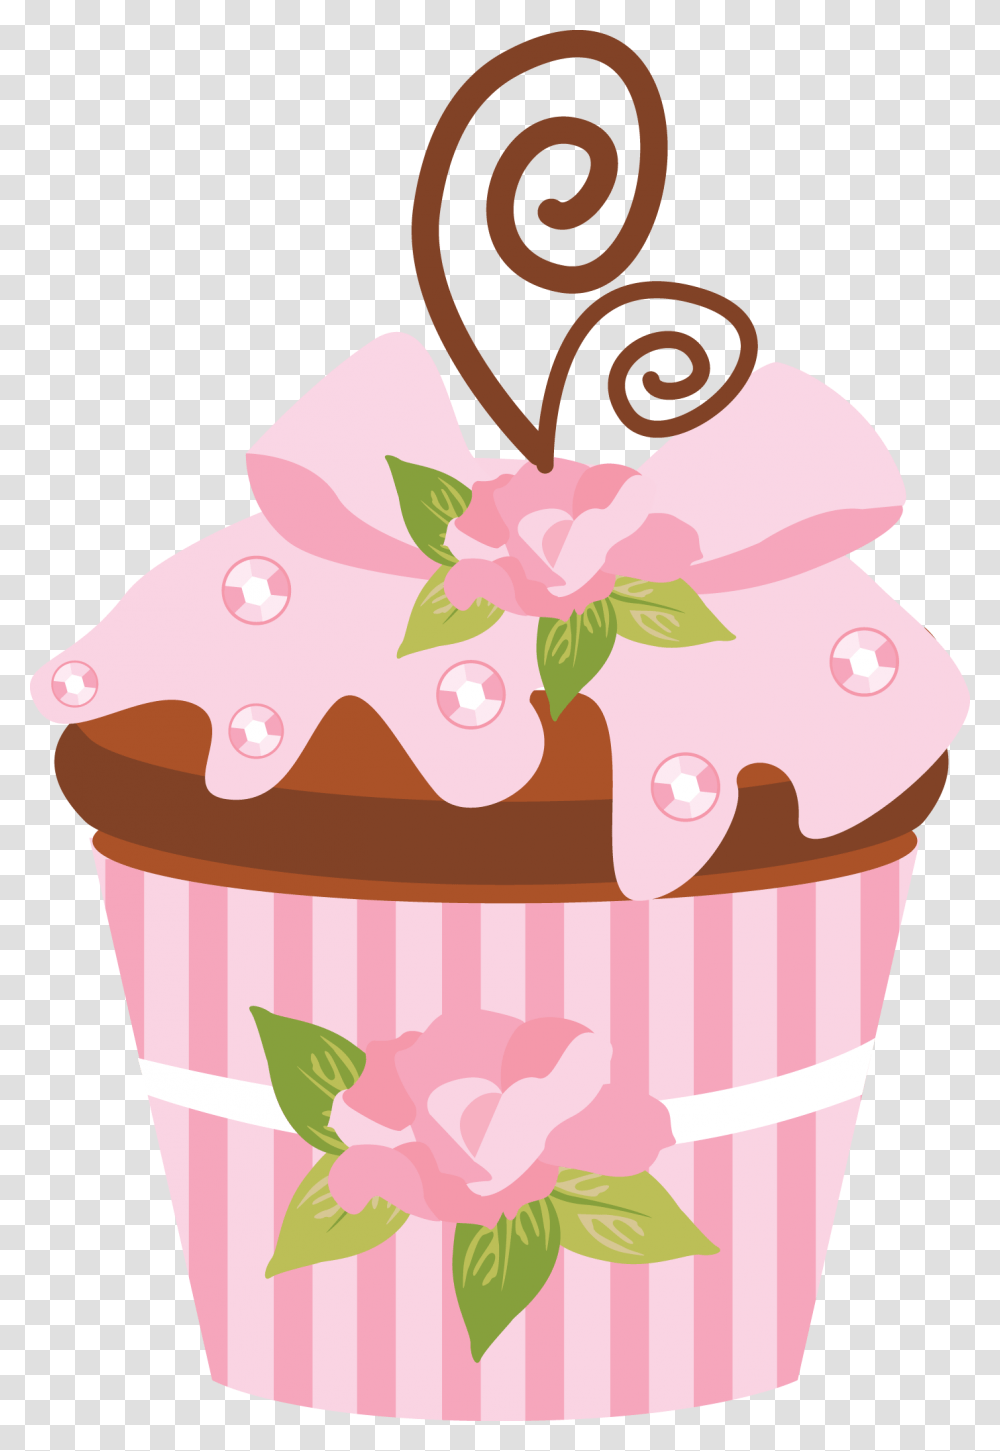 Free Clip Art For Commercial Use Starburst Clipart Cupcake, Cream, Dessert, Food, Creme Transparent Png